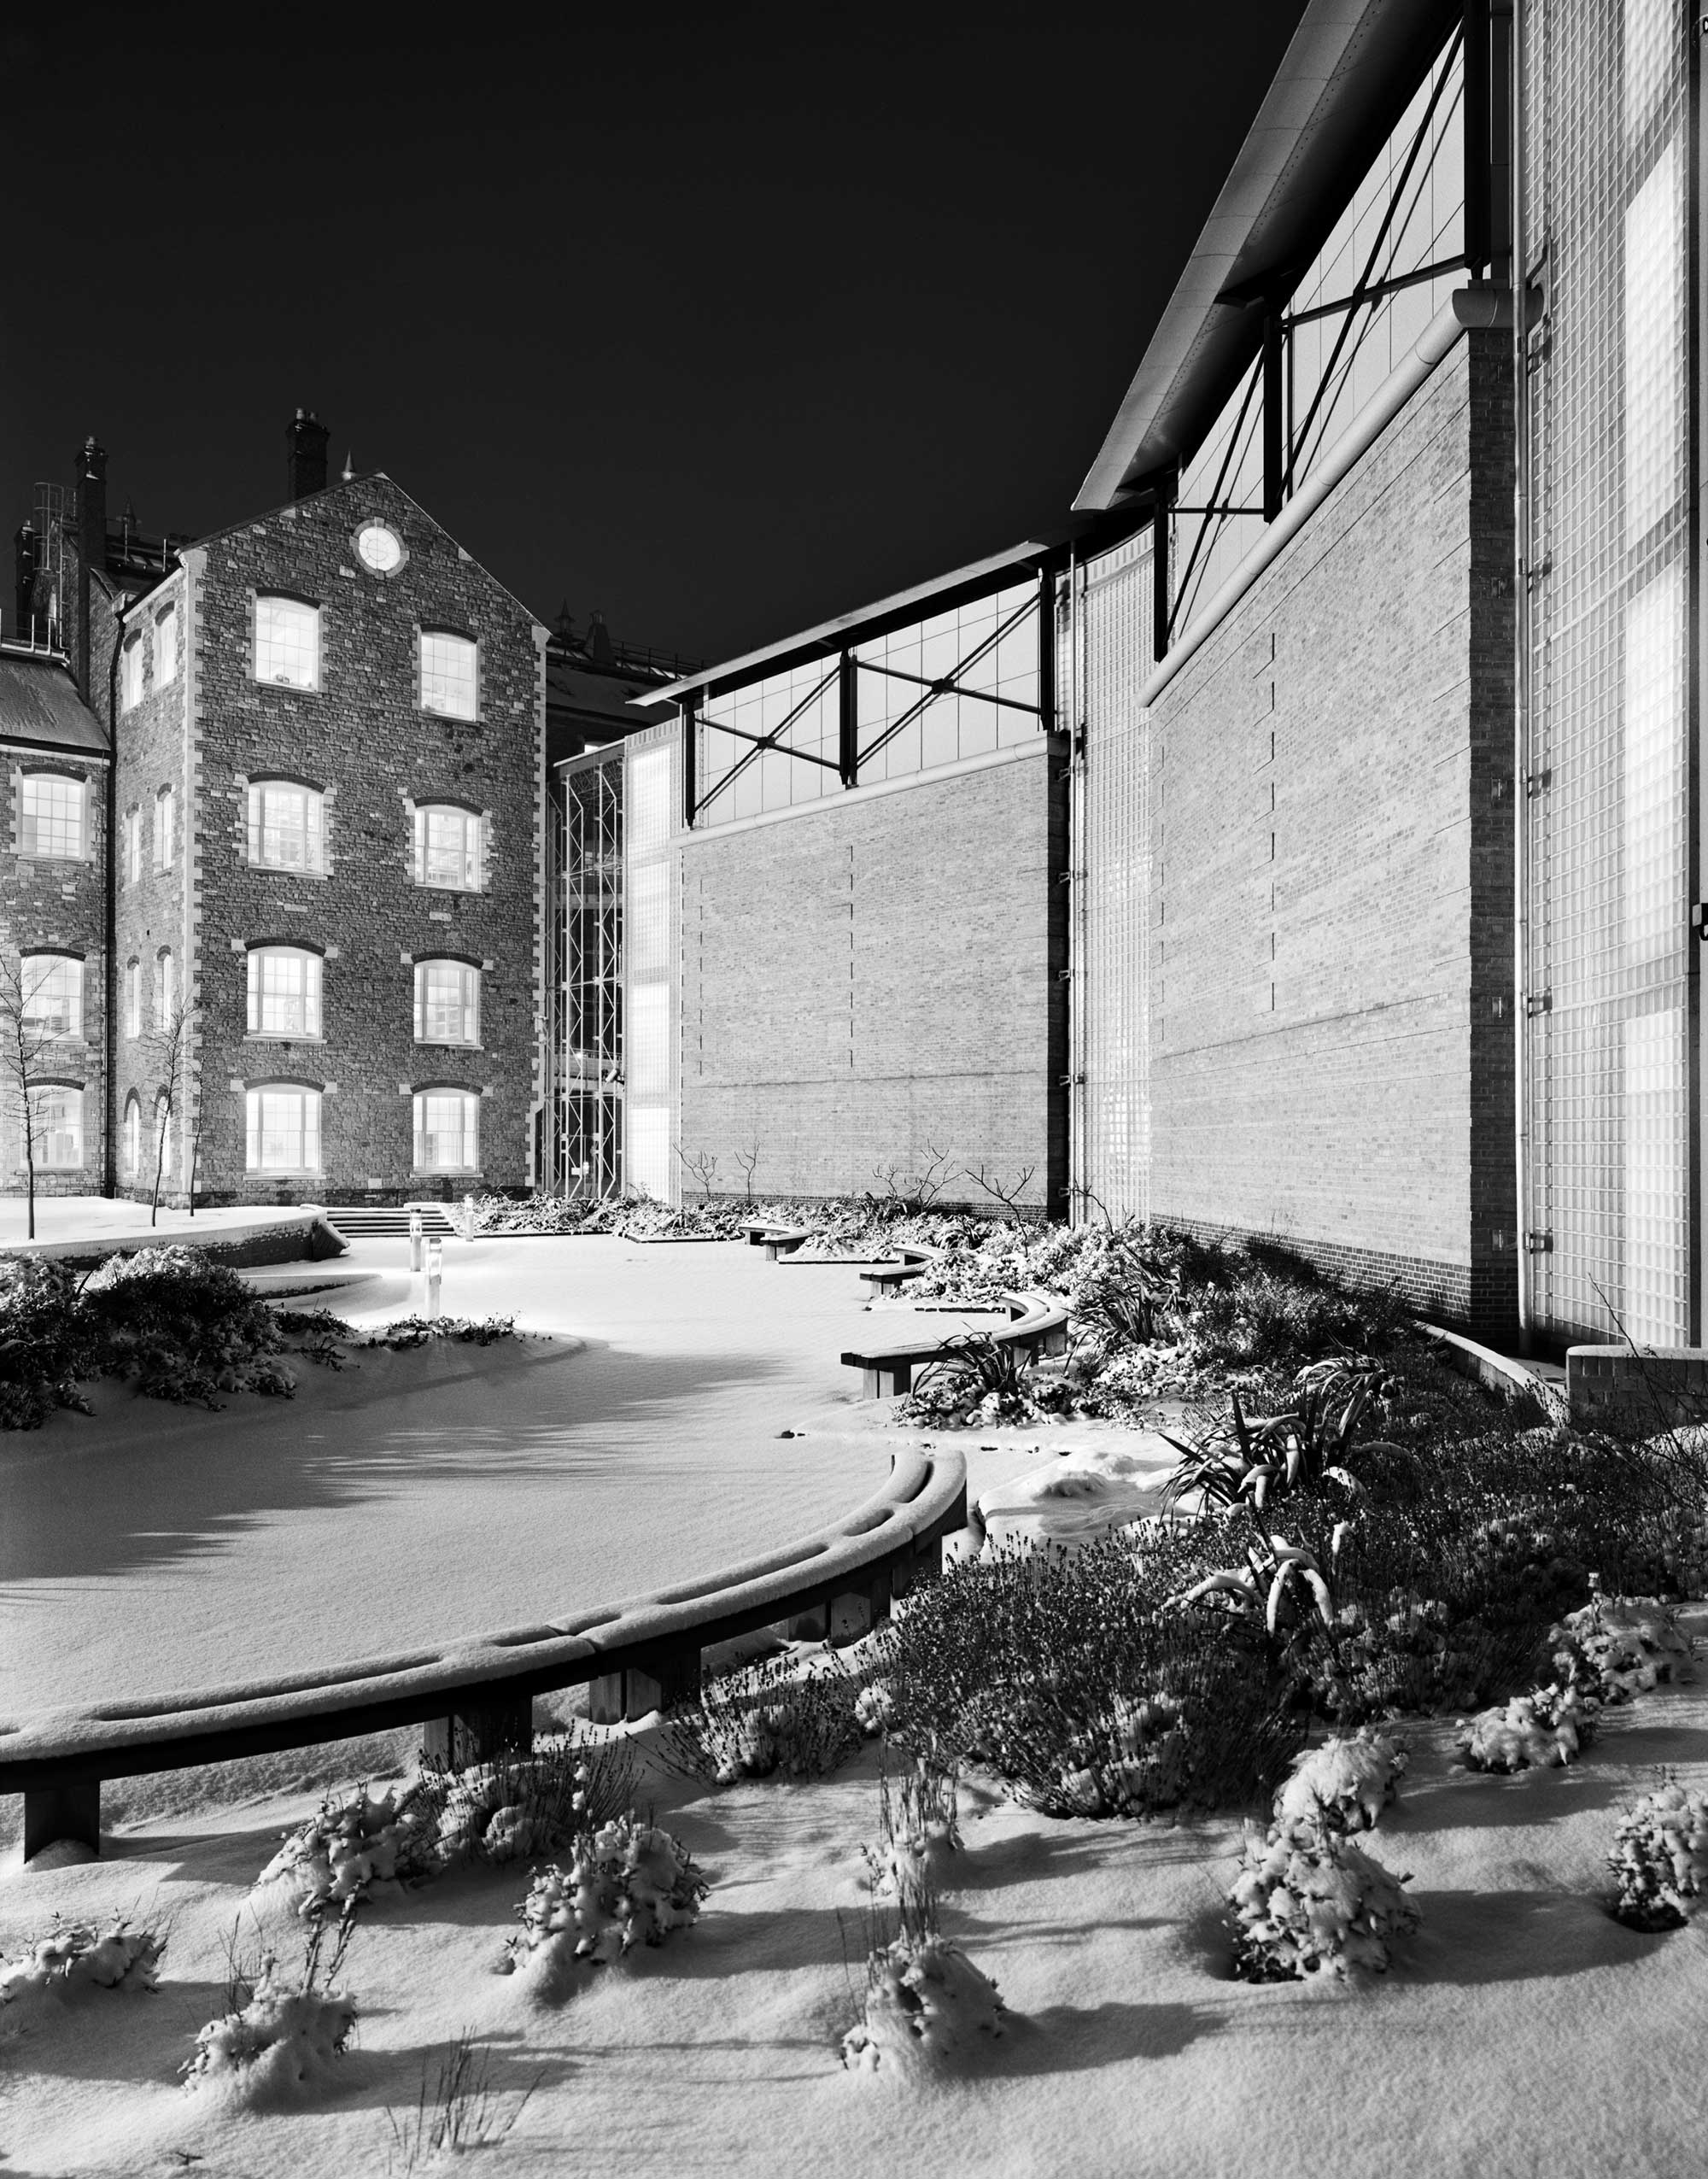 Black and white image of Historic England's Swindon office and Archive buildings in snow.